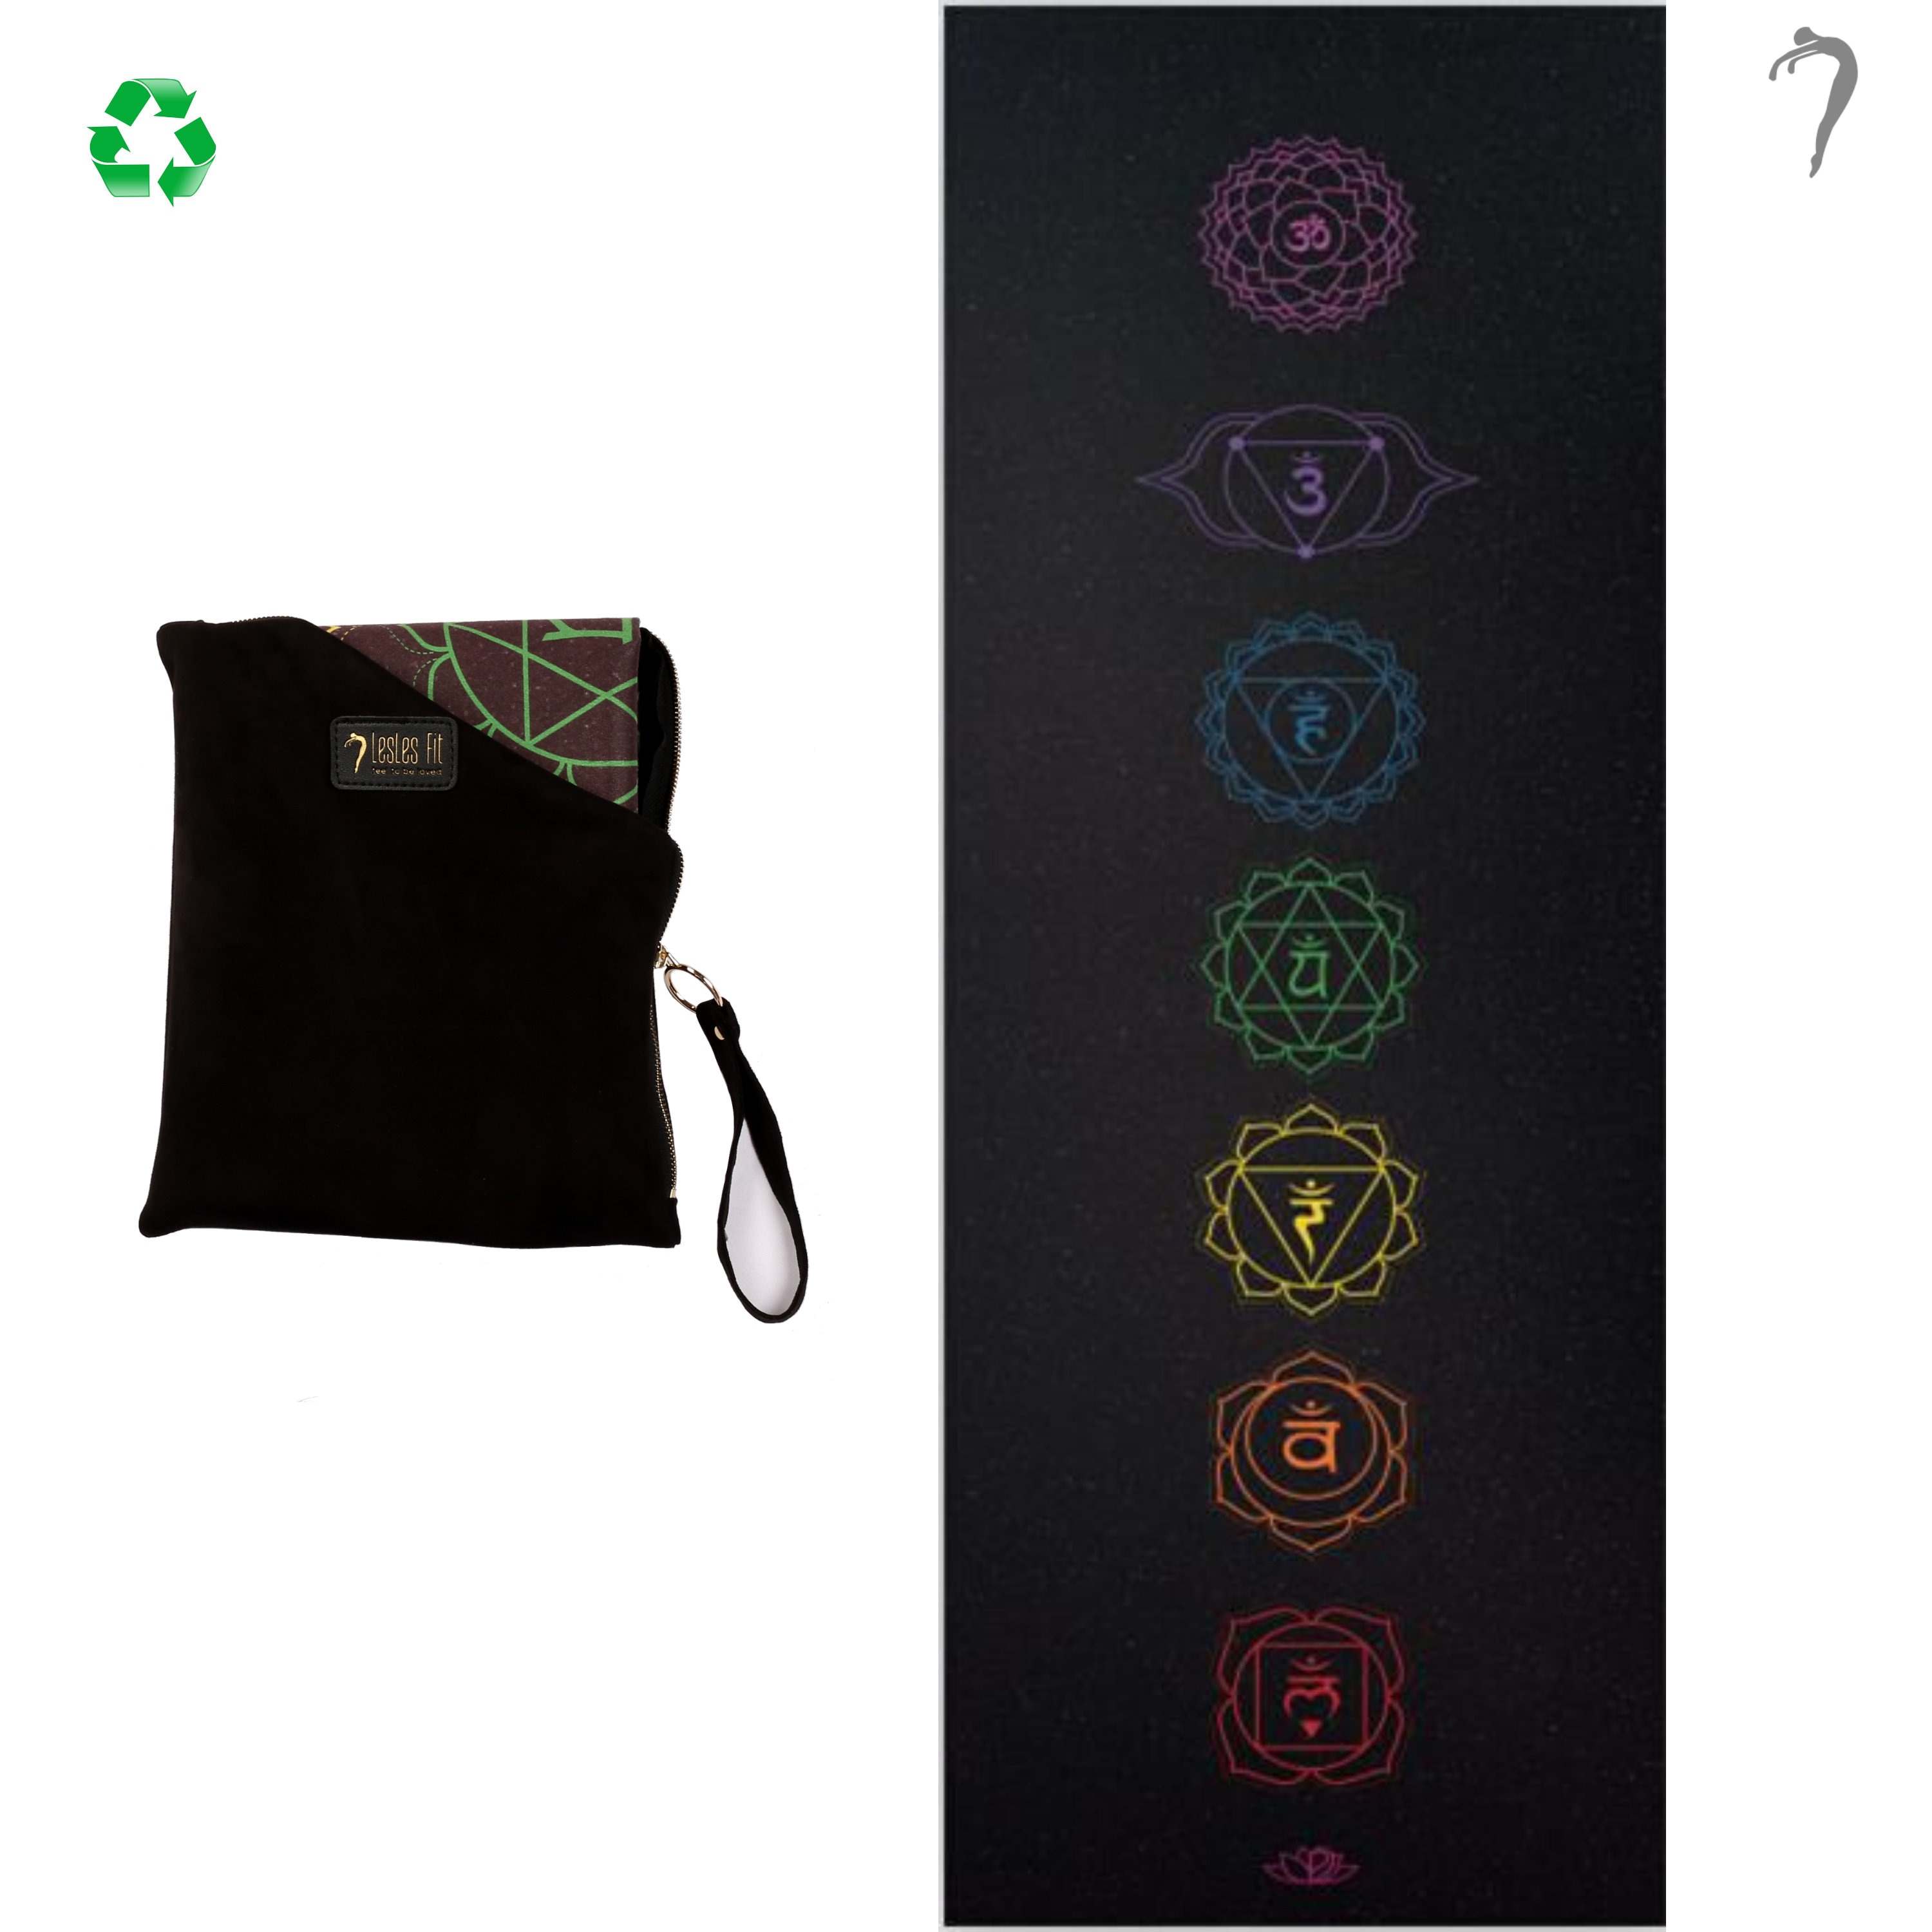 Super Thin Yoga & Meditation Mat, Elegant Carry Bag for Indoor or Outdoor,  Foldable Booksize Organic Natural Rubber Microfiber Surface 